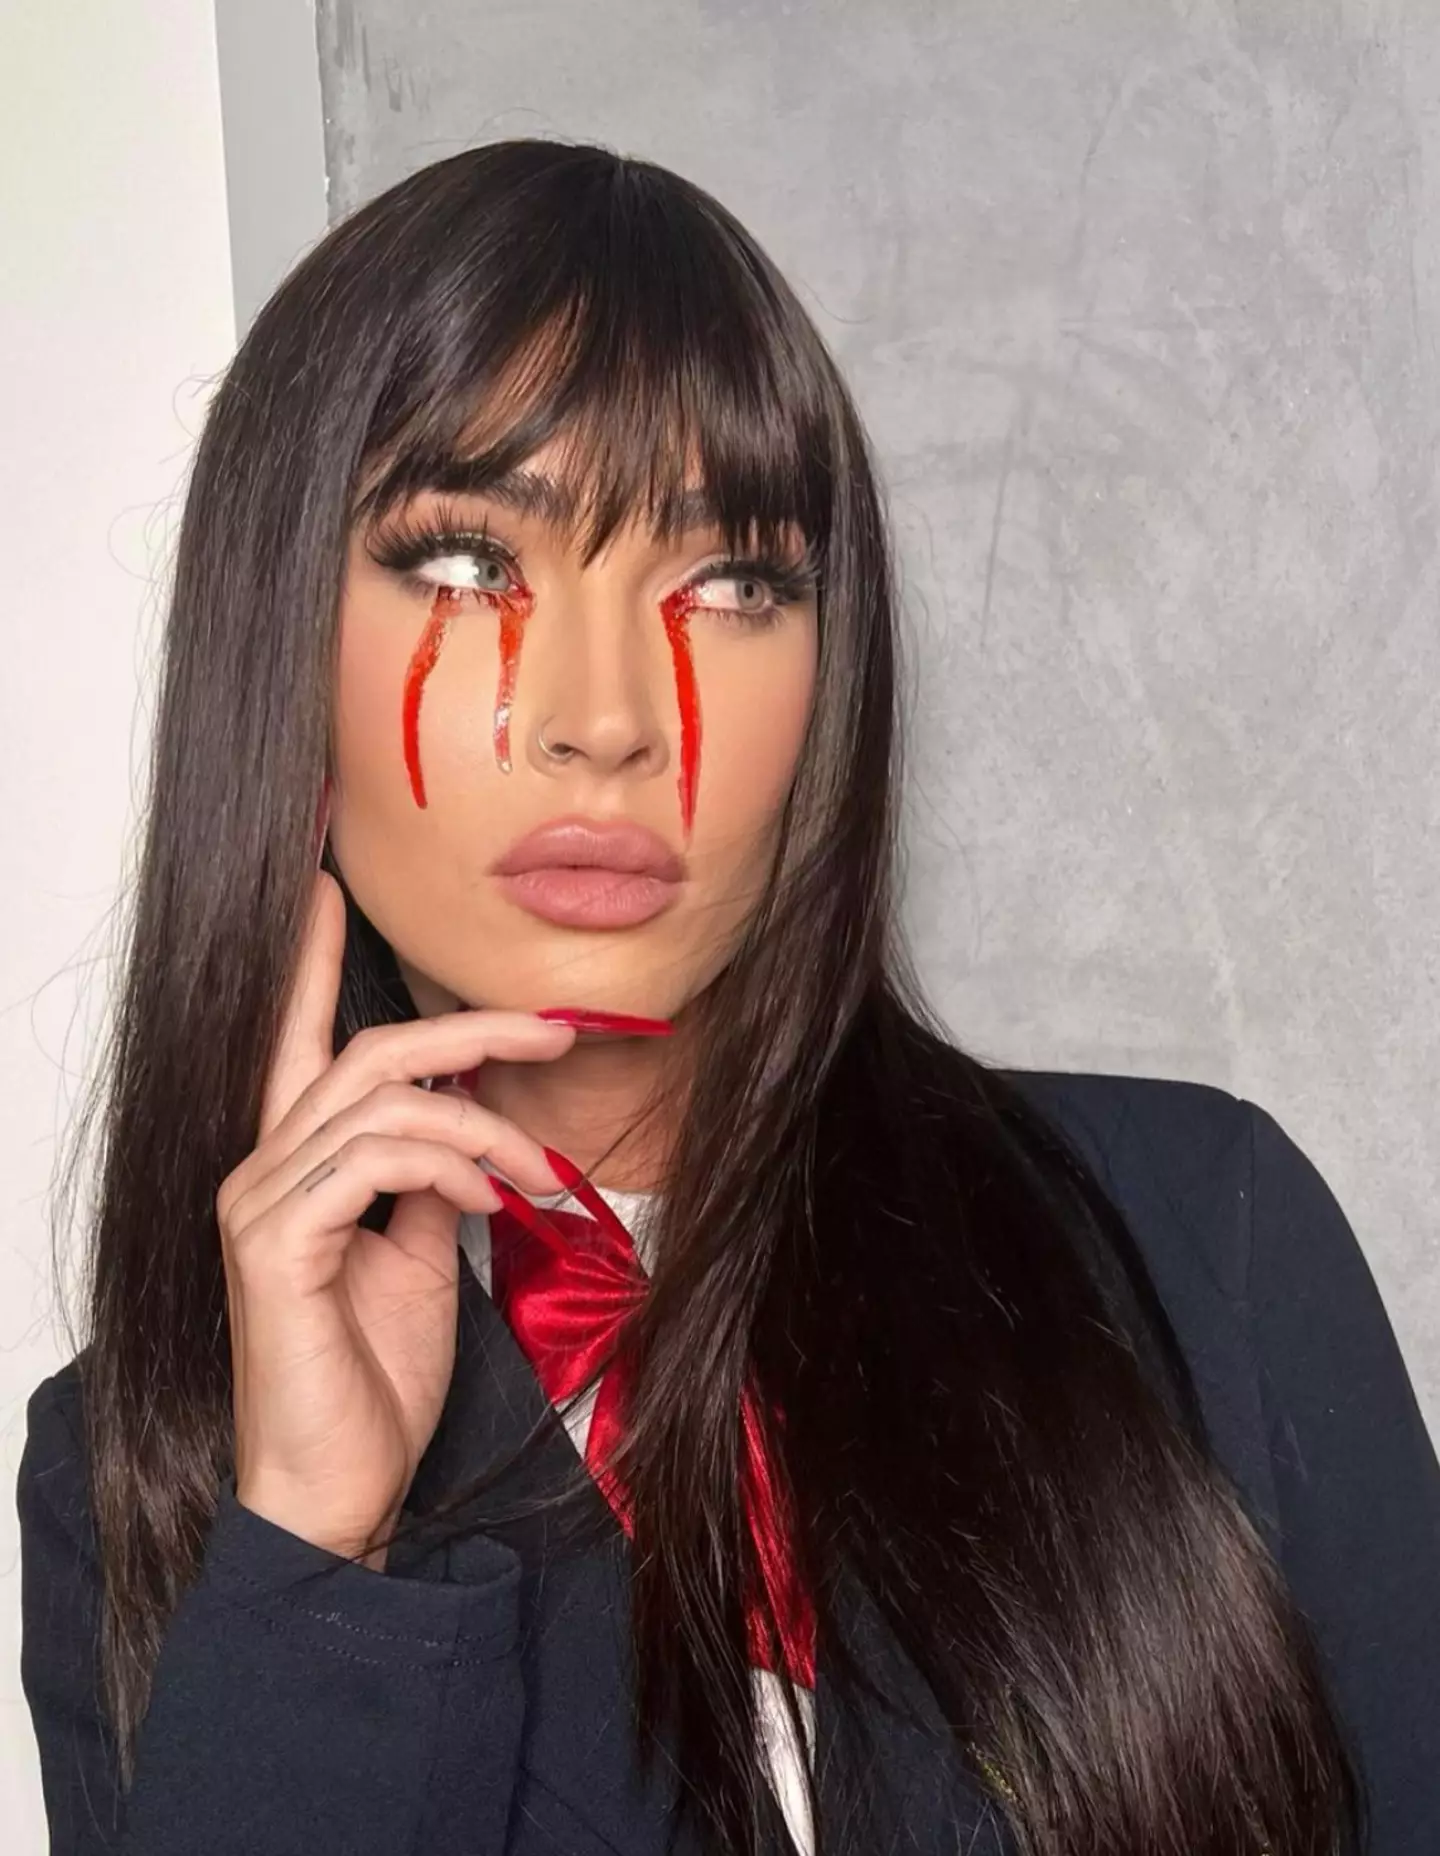 Megan Fox's Halloween costume has caused some controversy.